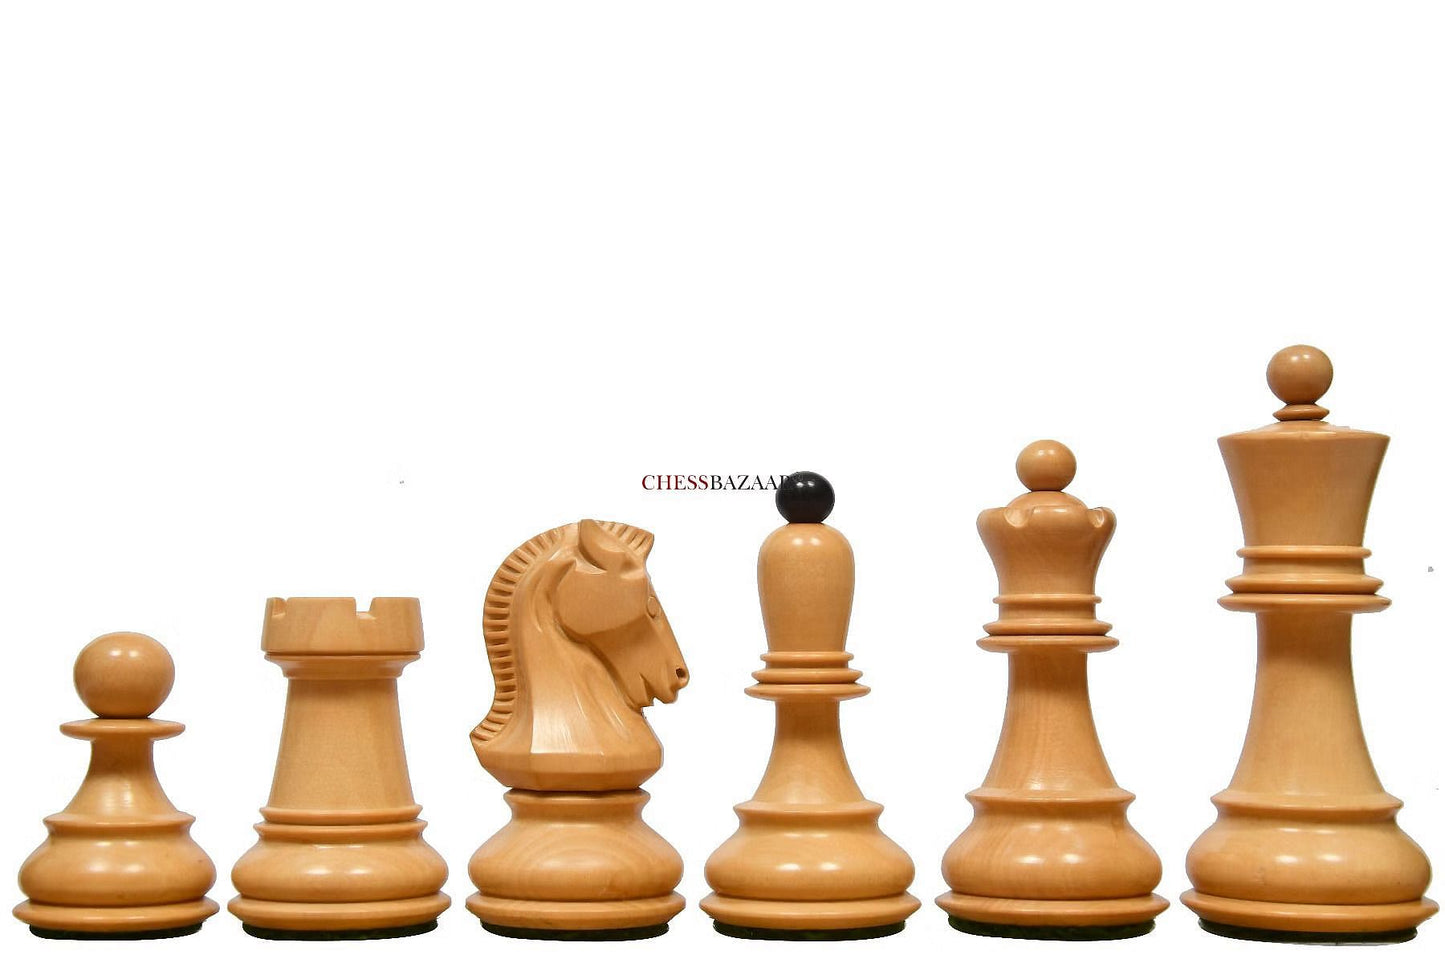 Reproduced chess pieces from chessbazaarindia